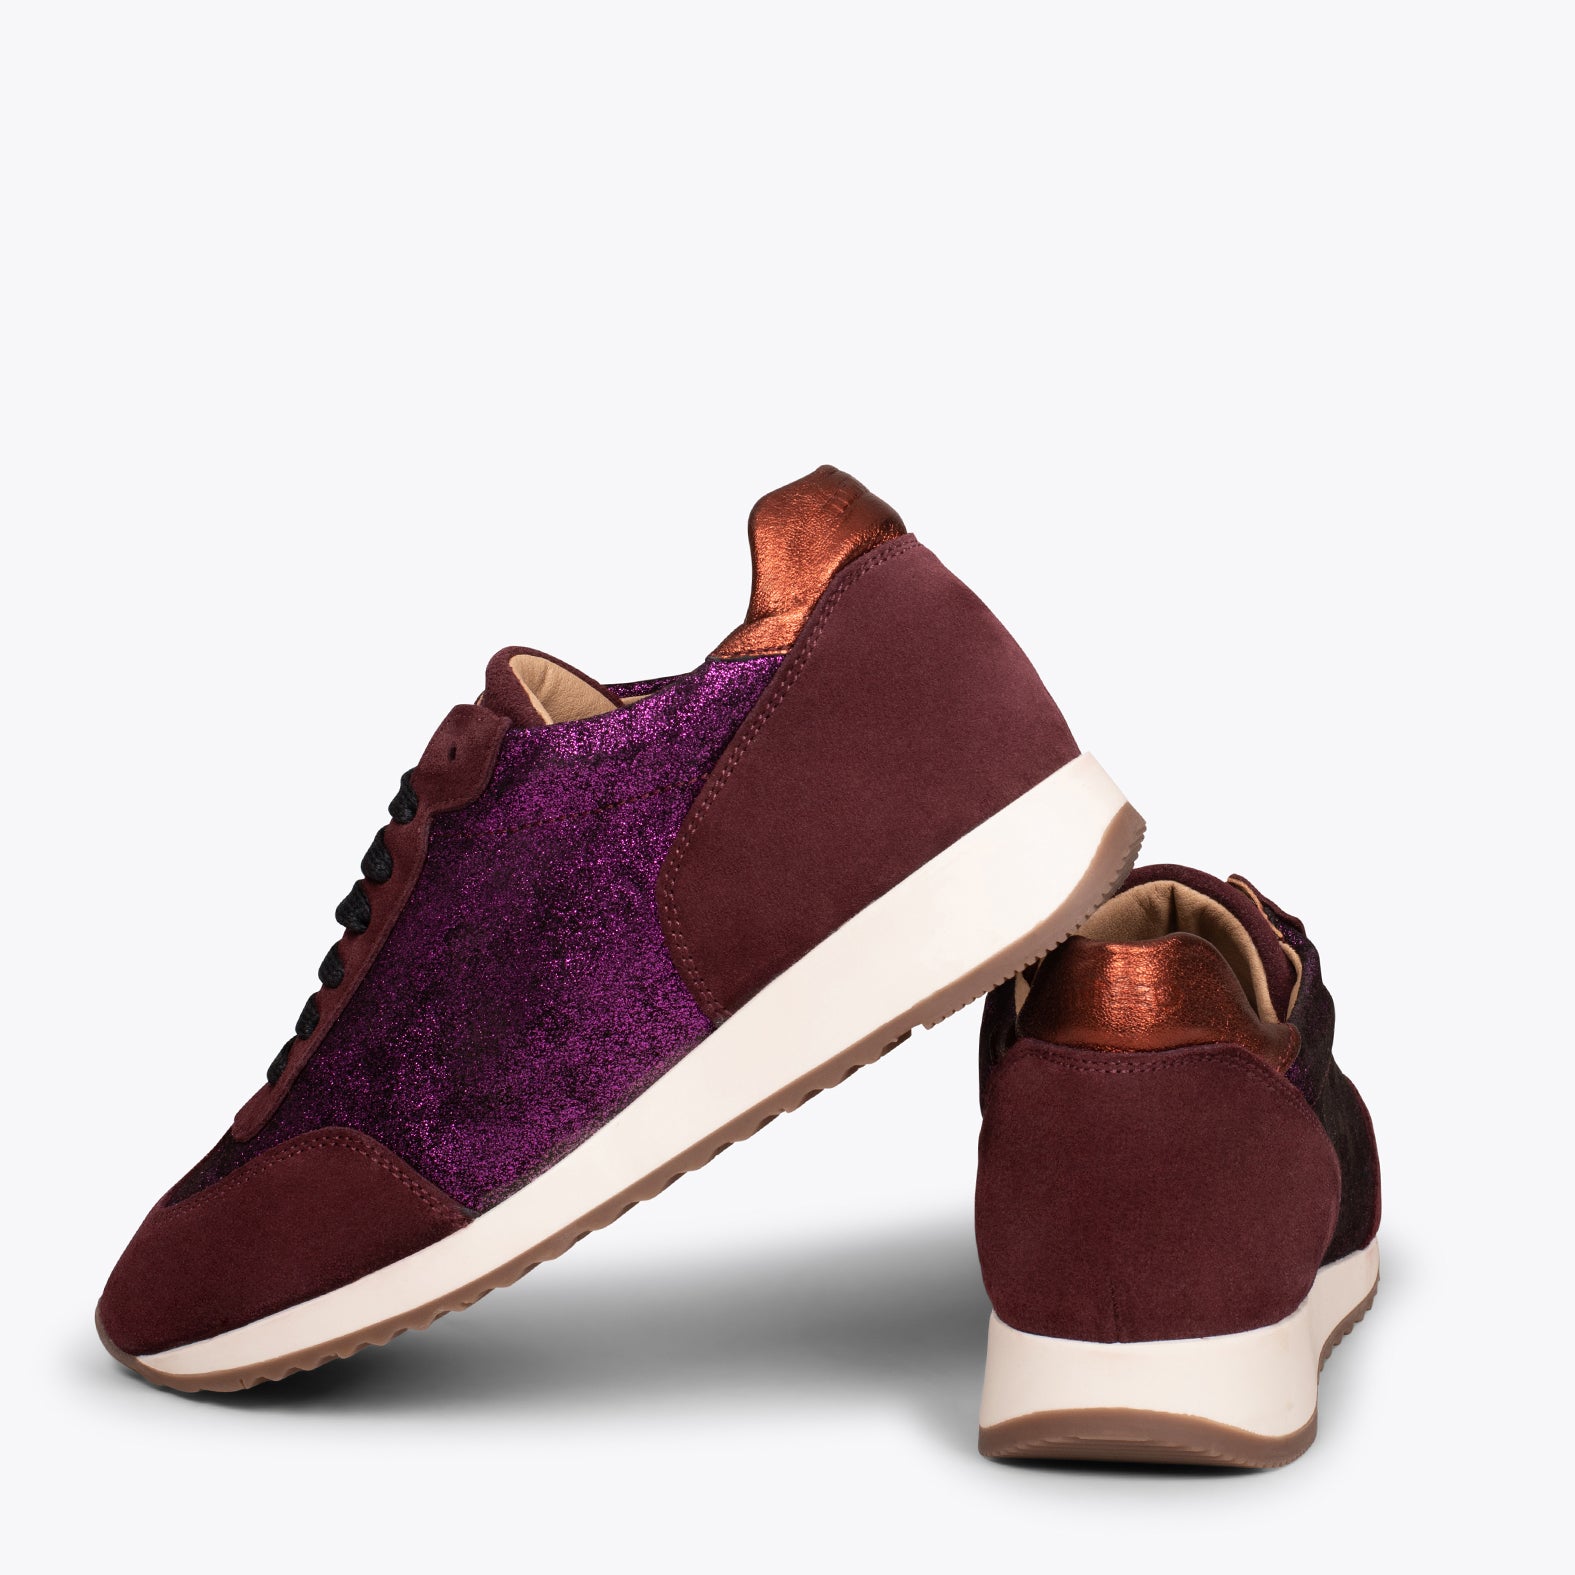 CASUAL – BURGUNDY sneaker with metallic leather detail